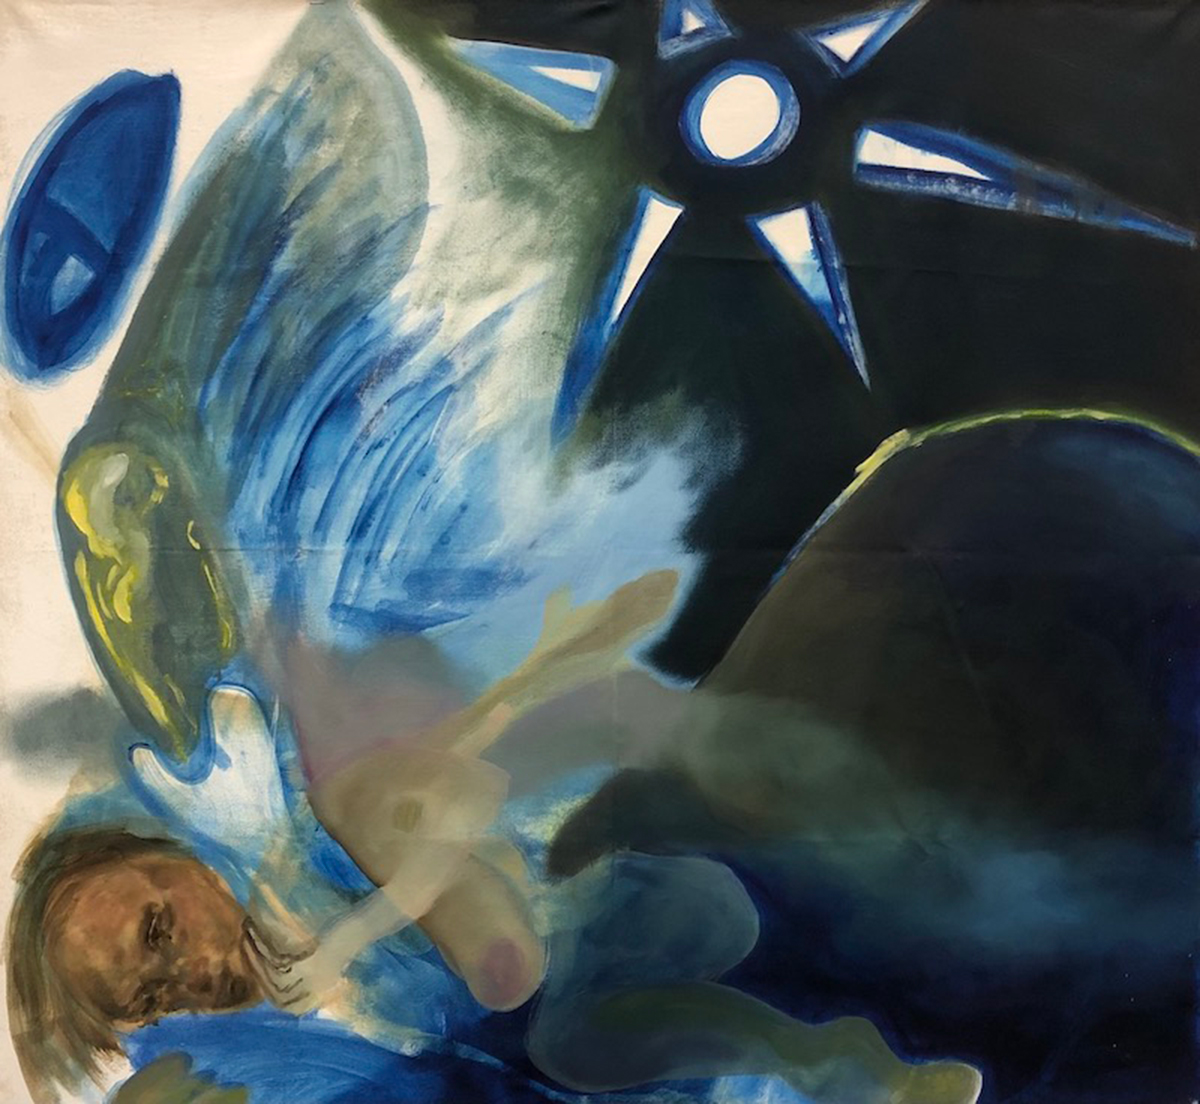 An abstract painting of a figure and a blue star.